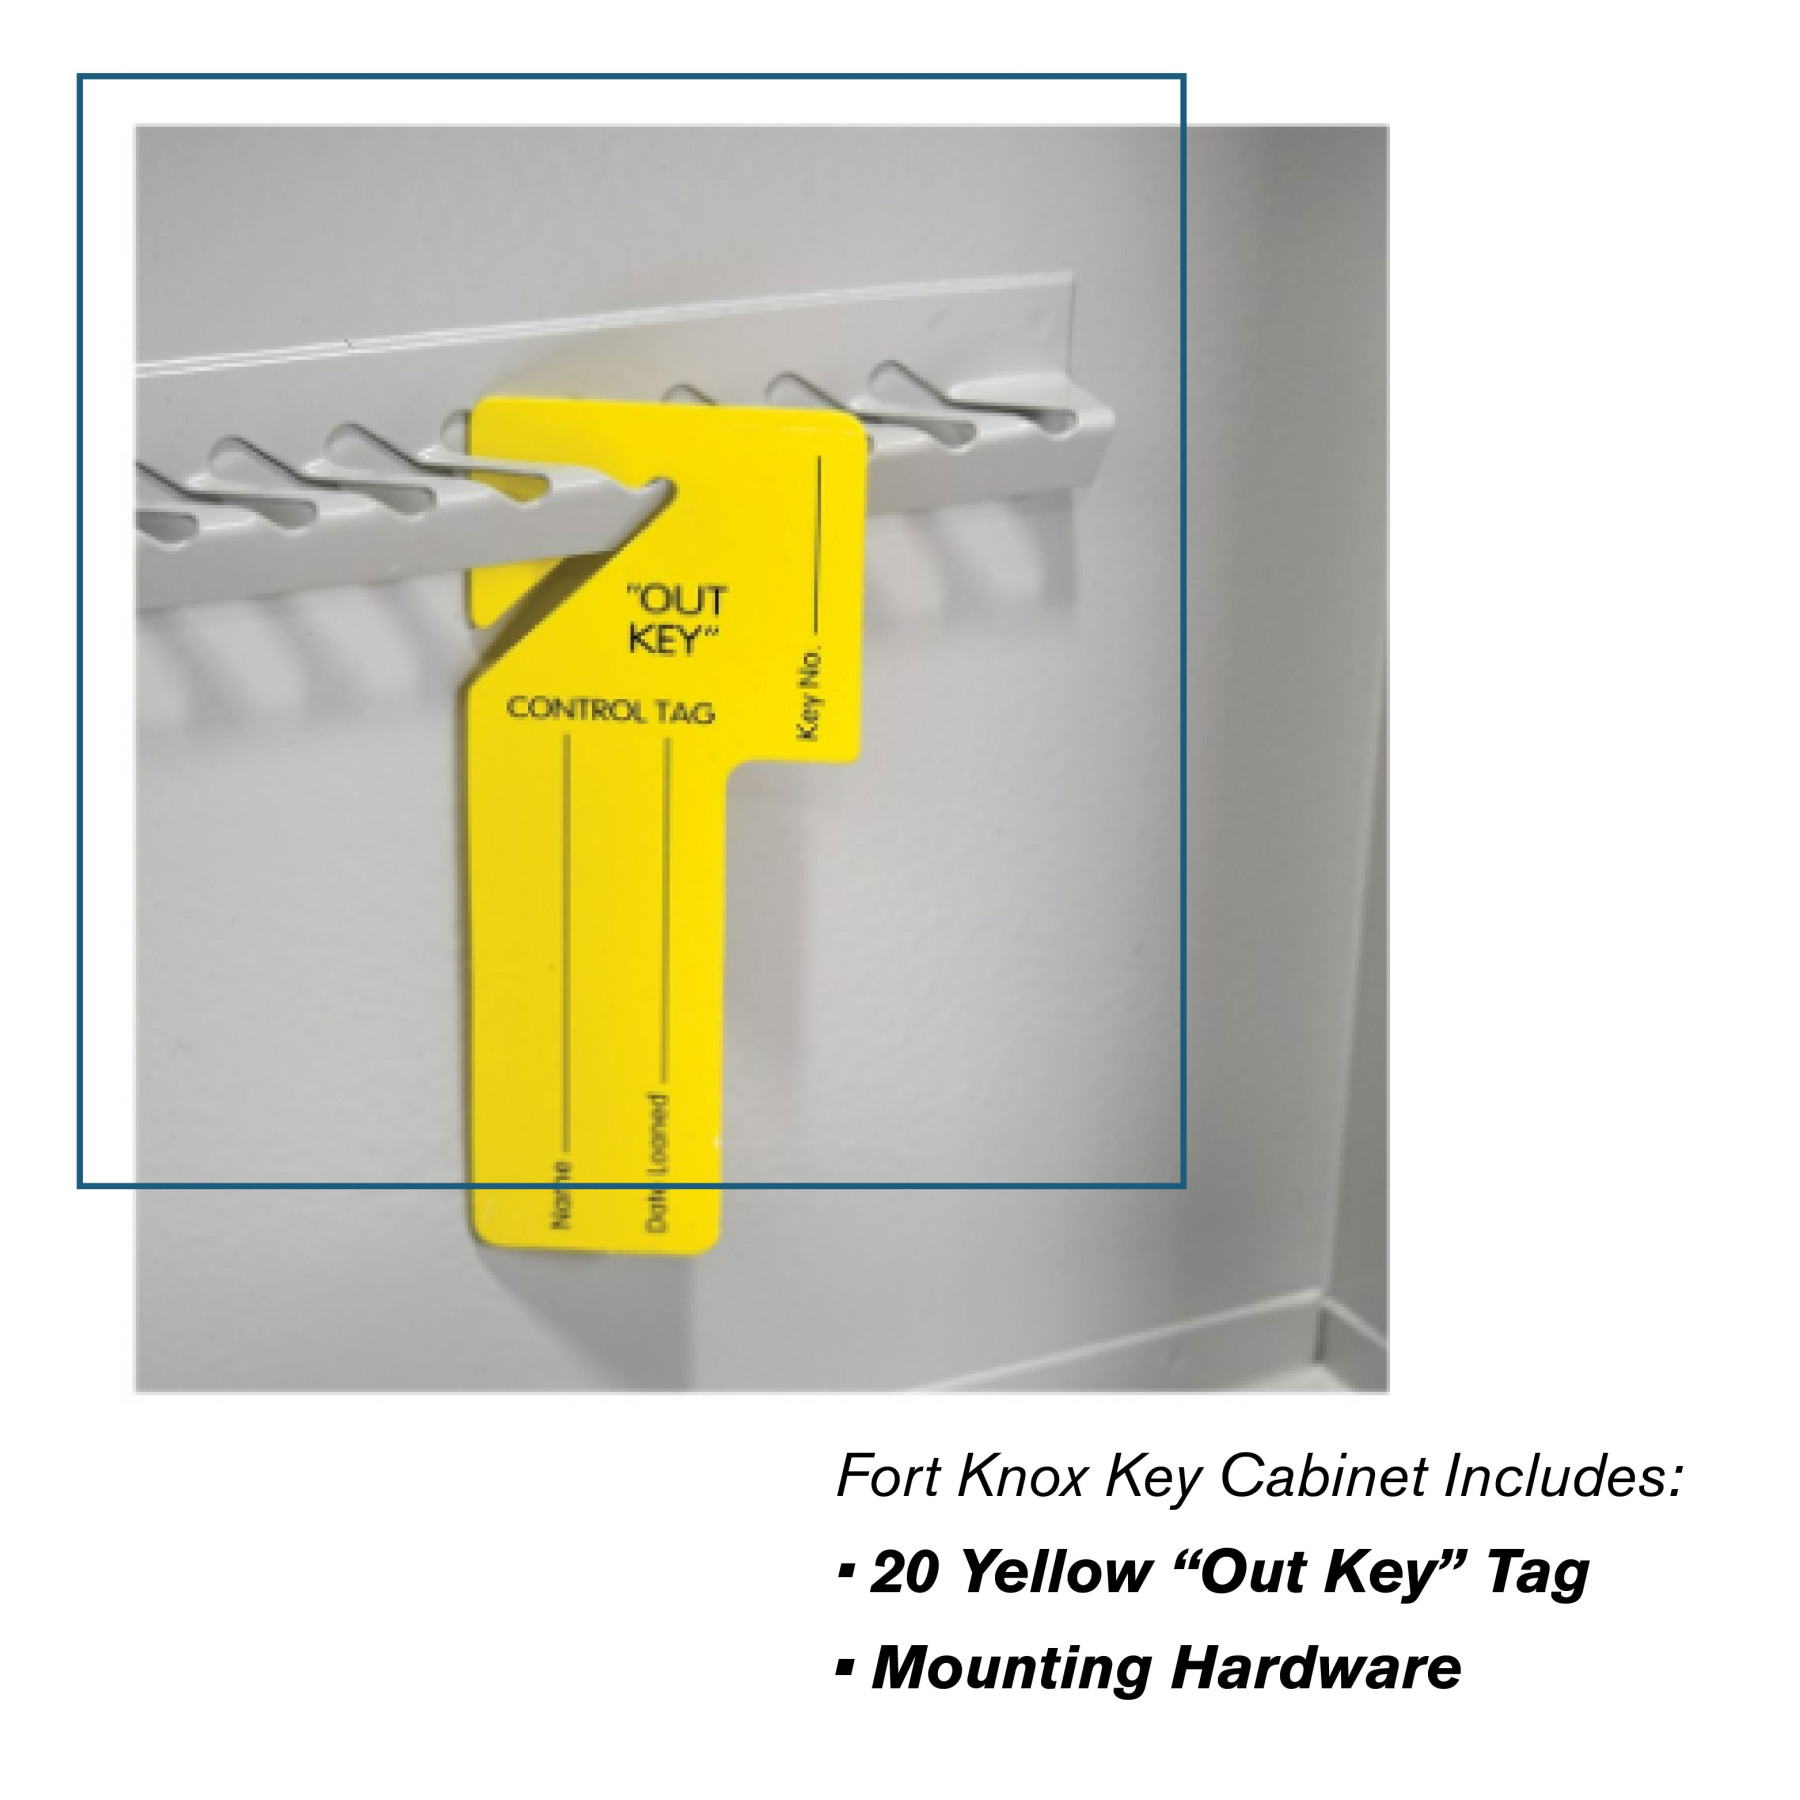 Dual Lock Fort Knox™ Key Cabinet - 200 Key Capacity - Keyed Differently - yellow out key